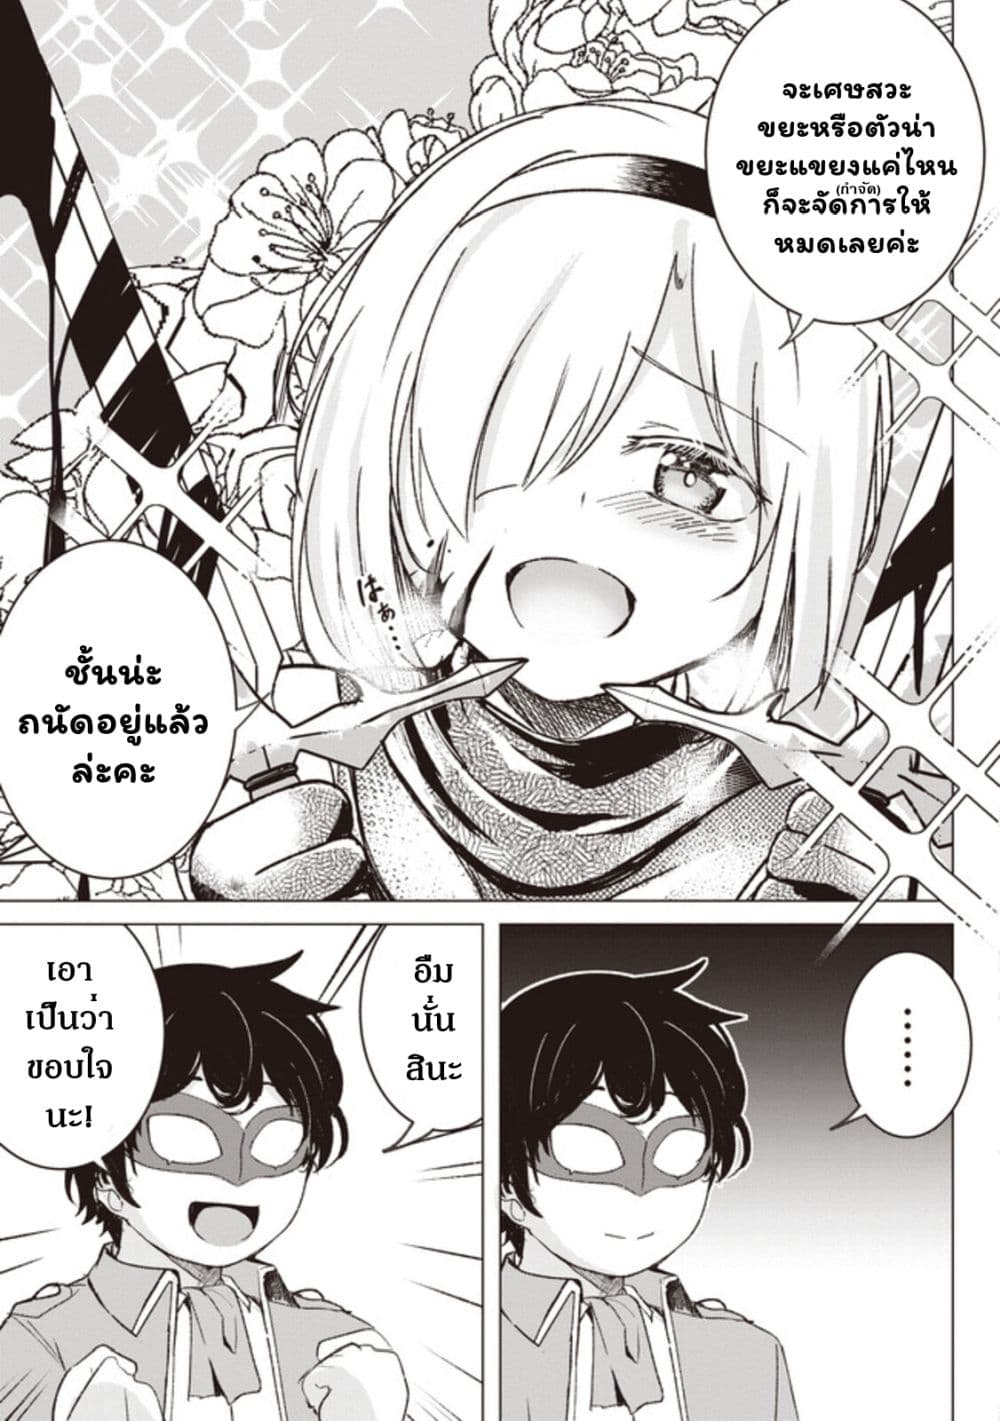 Another World’s ตอนที่ 2.1 (5)